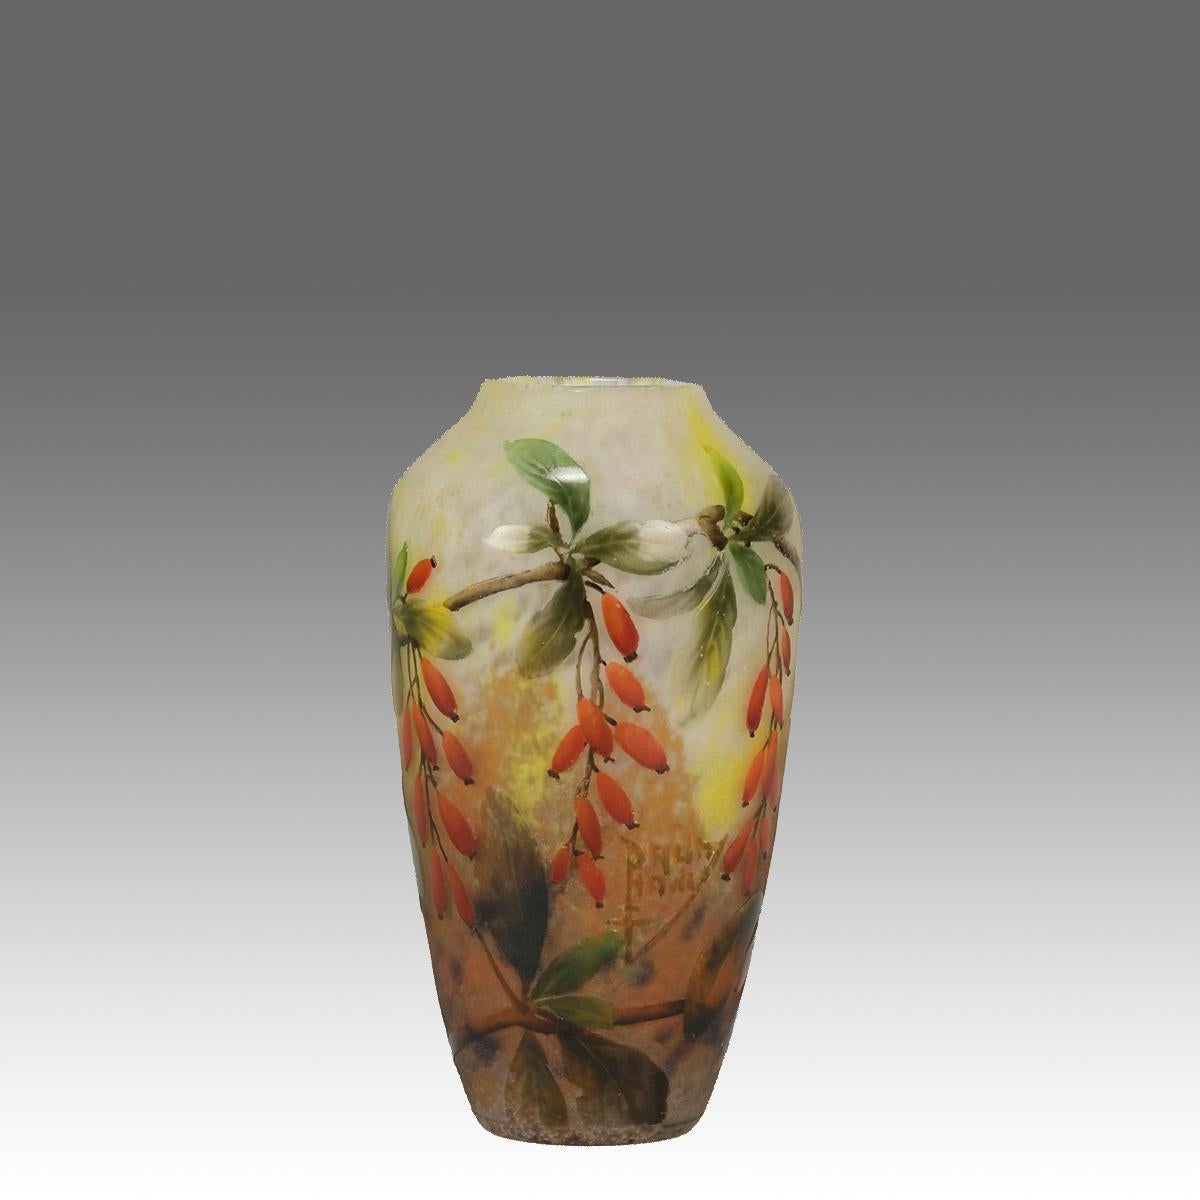 An attractive late 19th Century cameo glass vase with fruiting cotoneaster plant against a variegated background with excellent colour and fine detail, signed Daum Nancy with the Cross of Lorraine.
ADDITIONAL INFORMATION
Height:                     